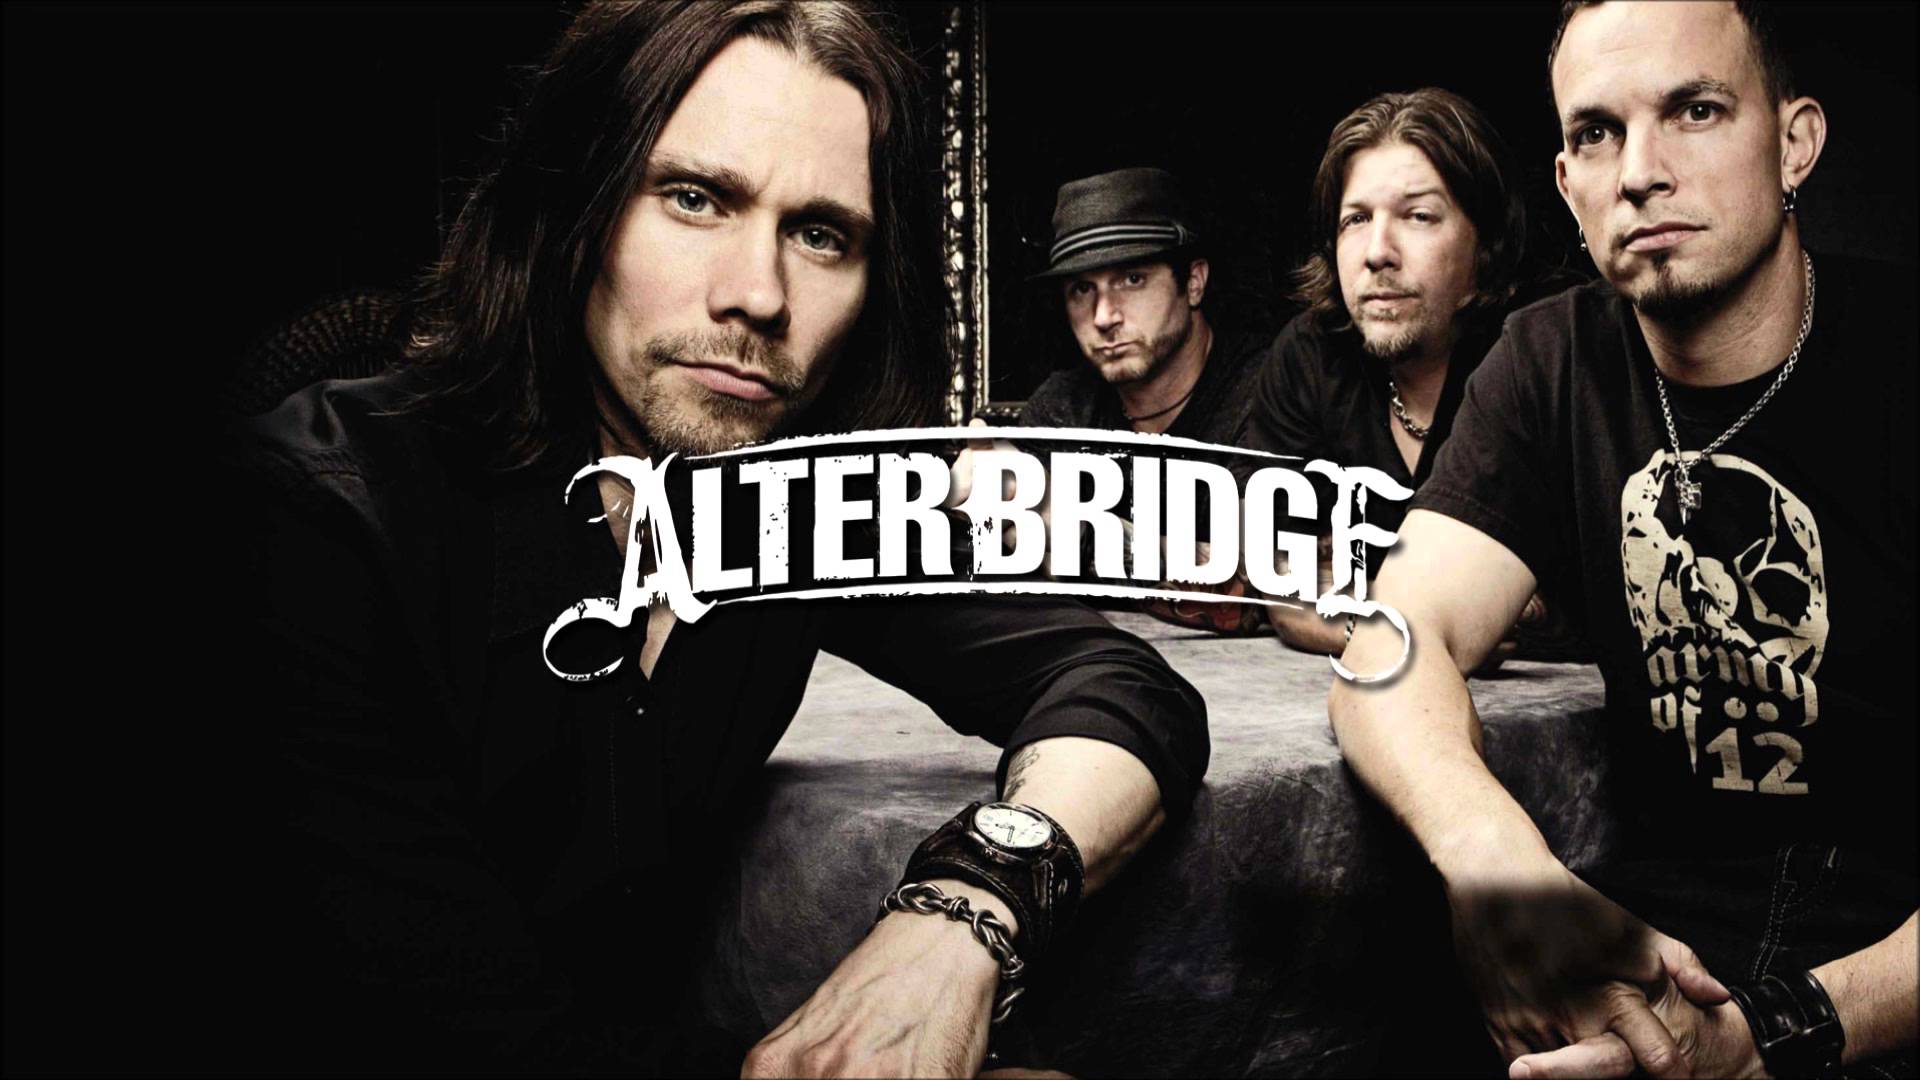 Alter Bridge When You Want To Find Music In Your Life. Again